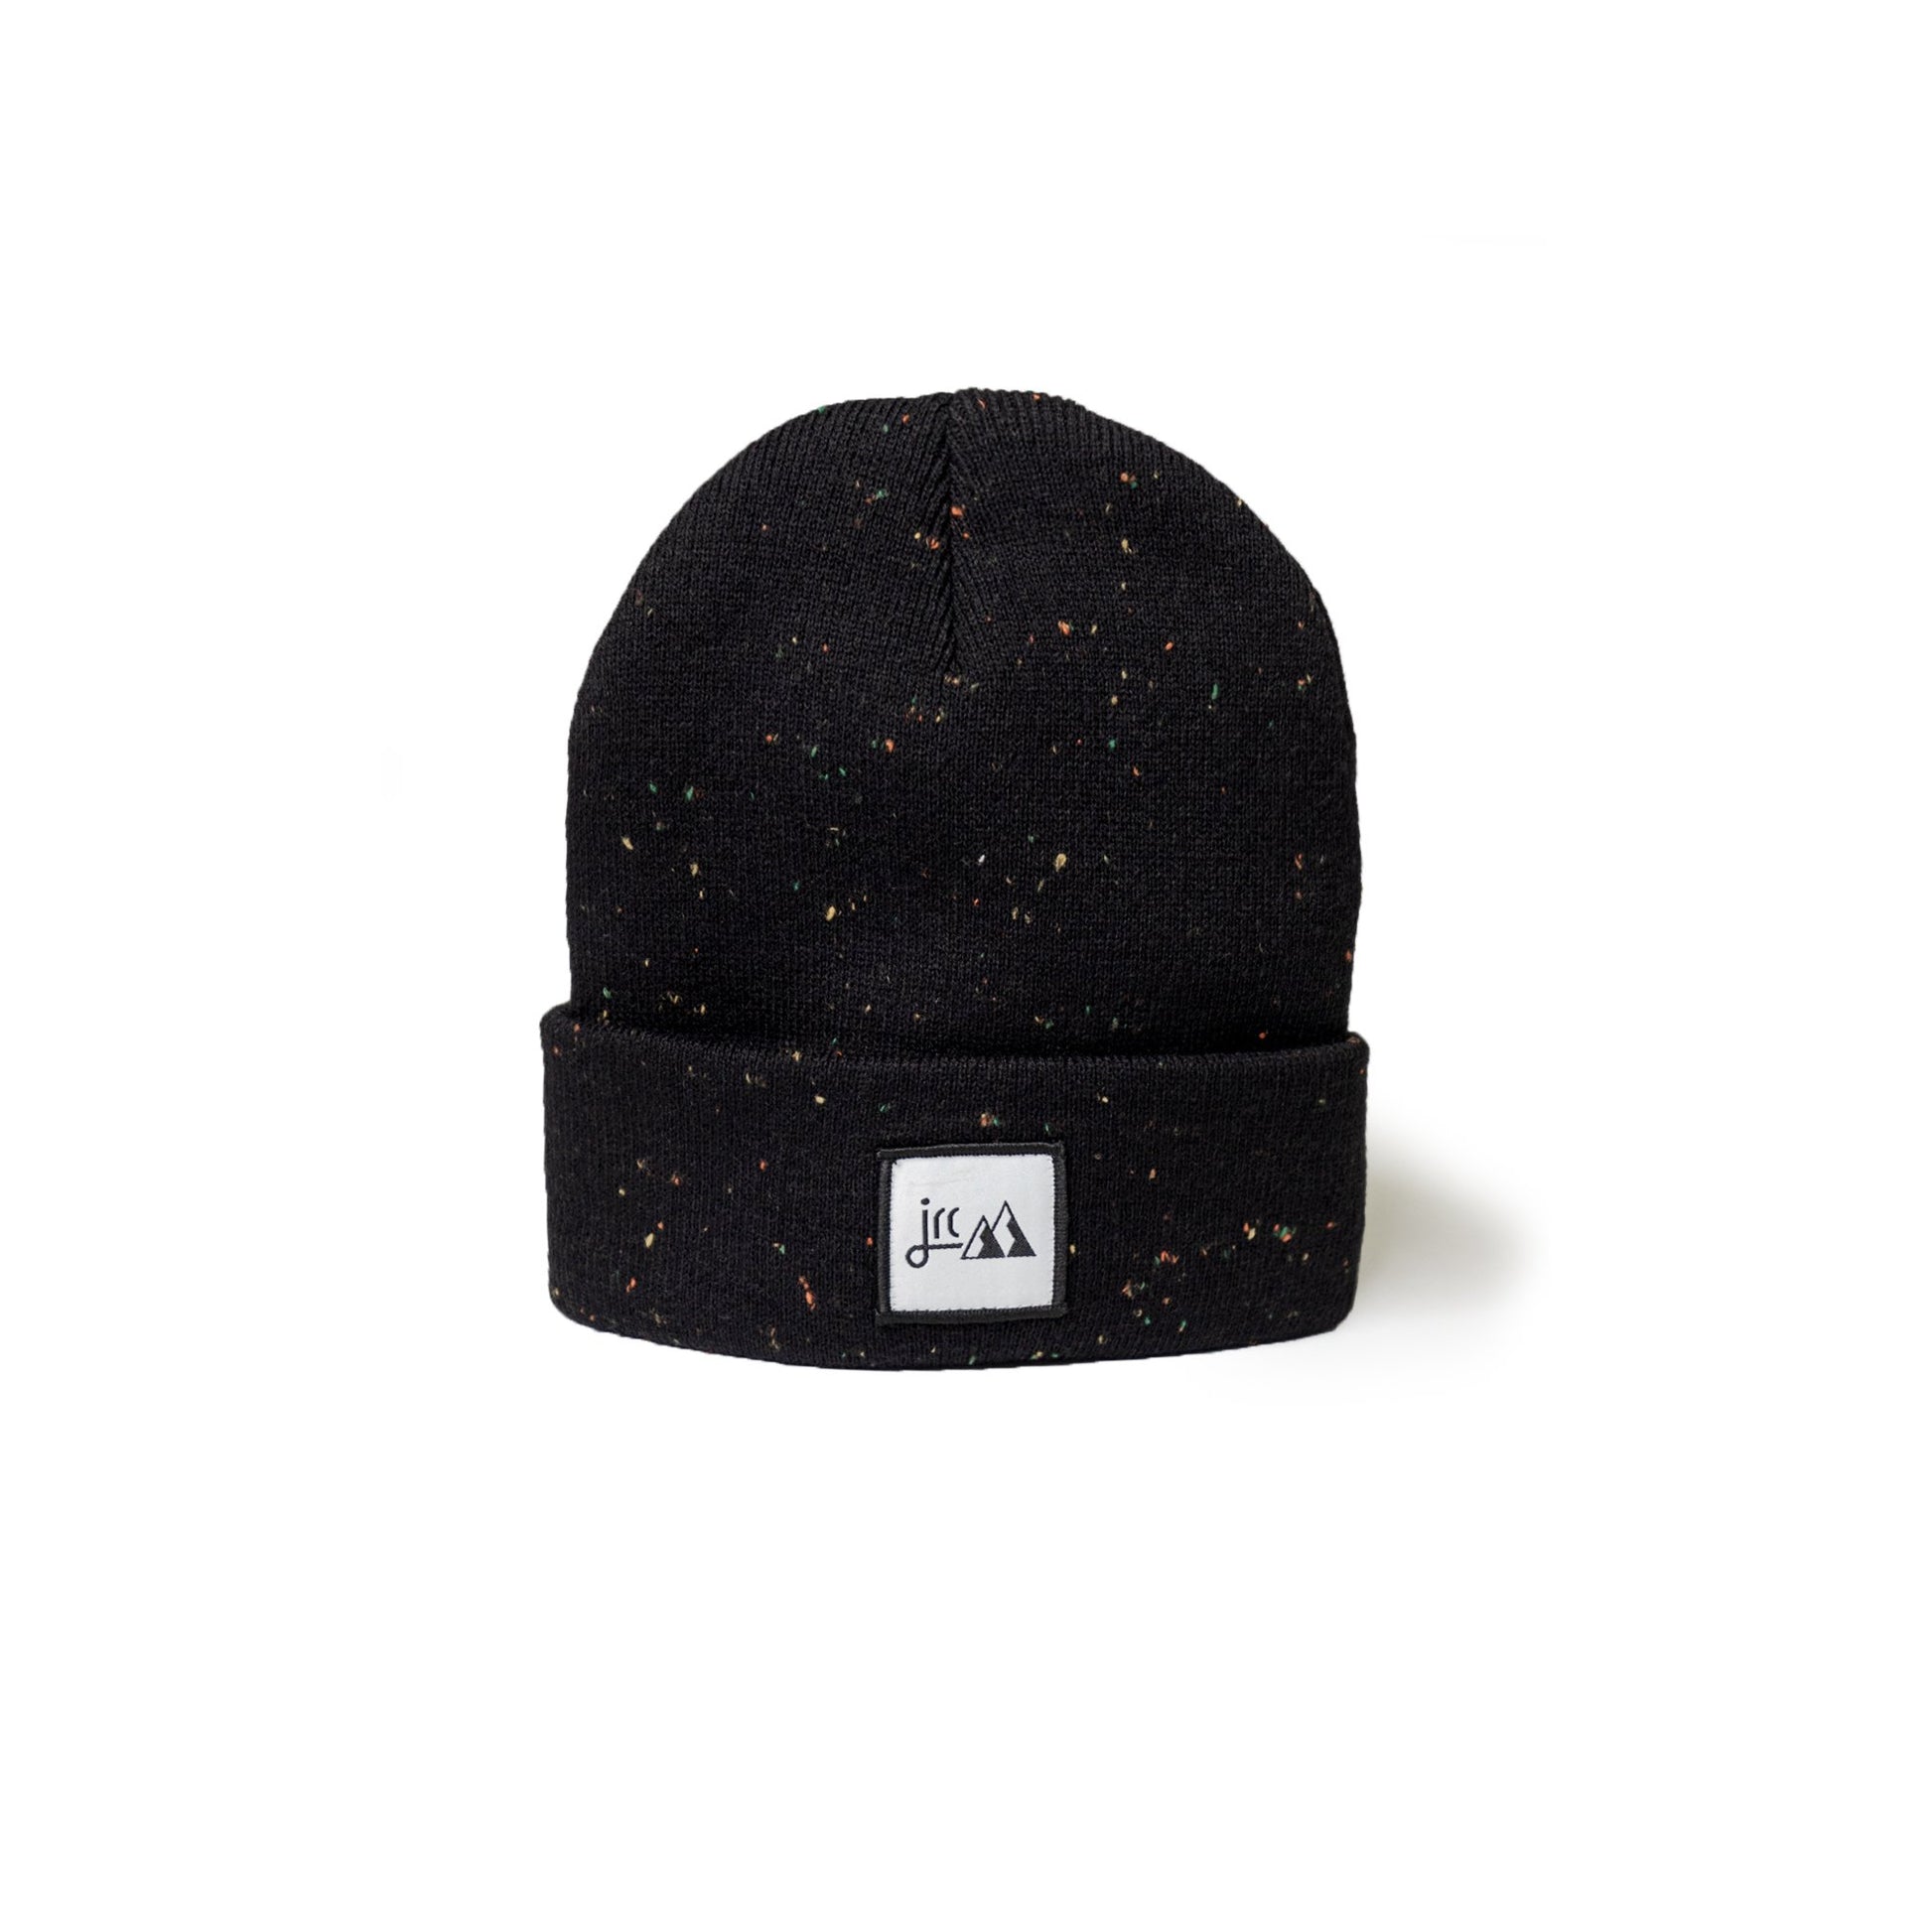 Black cuffed beanie hat with flecked colour and square front logo design